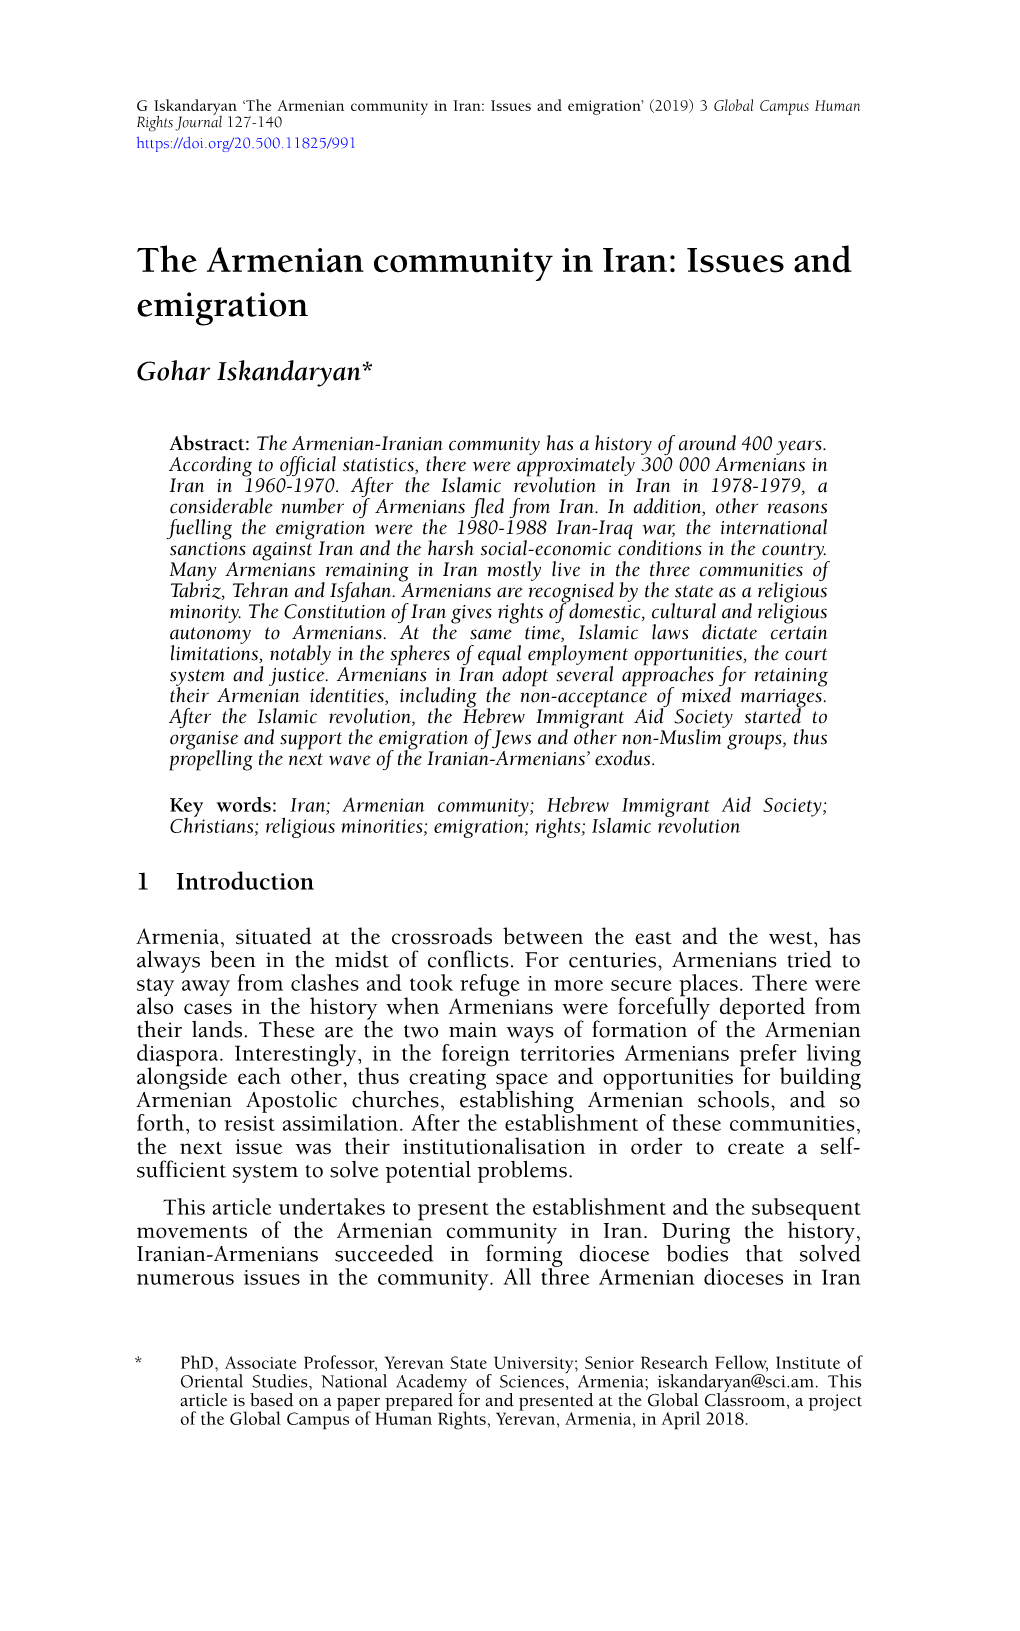 The Armenian Community in Iran: Issues and Emigration’ (2019) 3 Global Campus Human Rights Journal 127-140